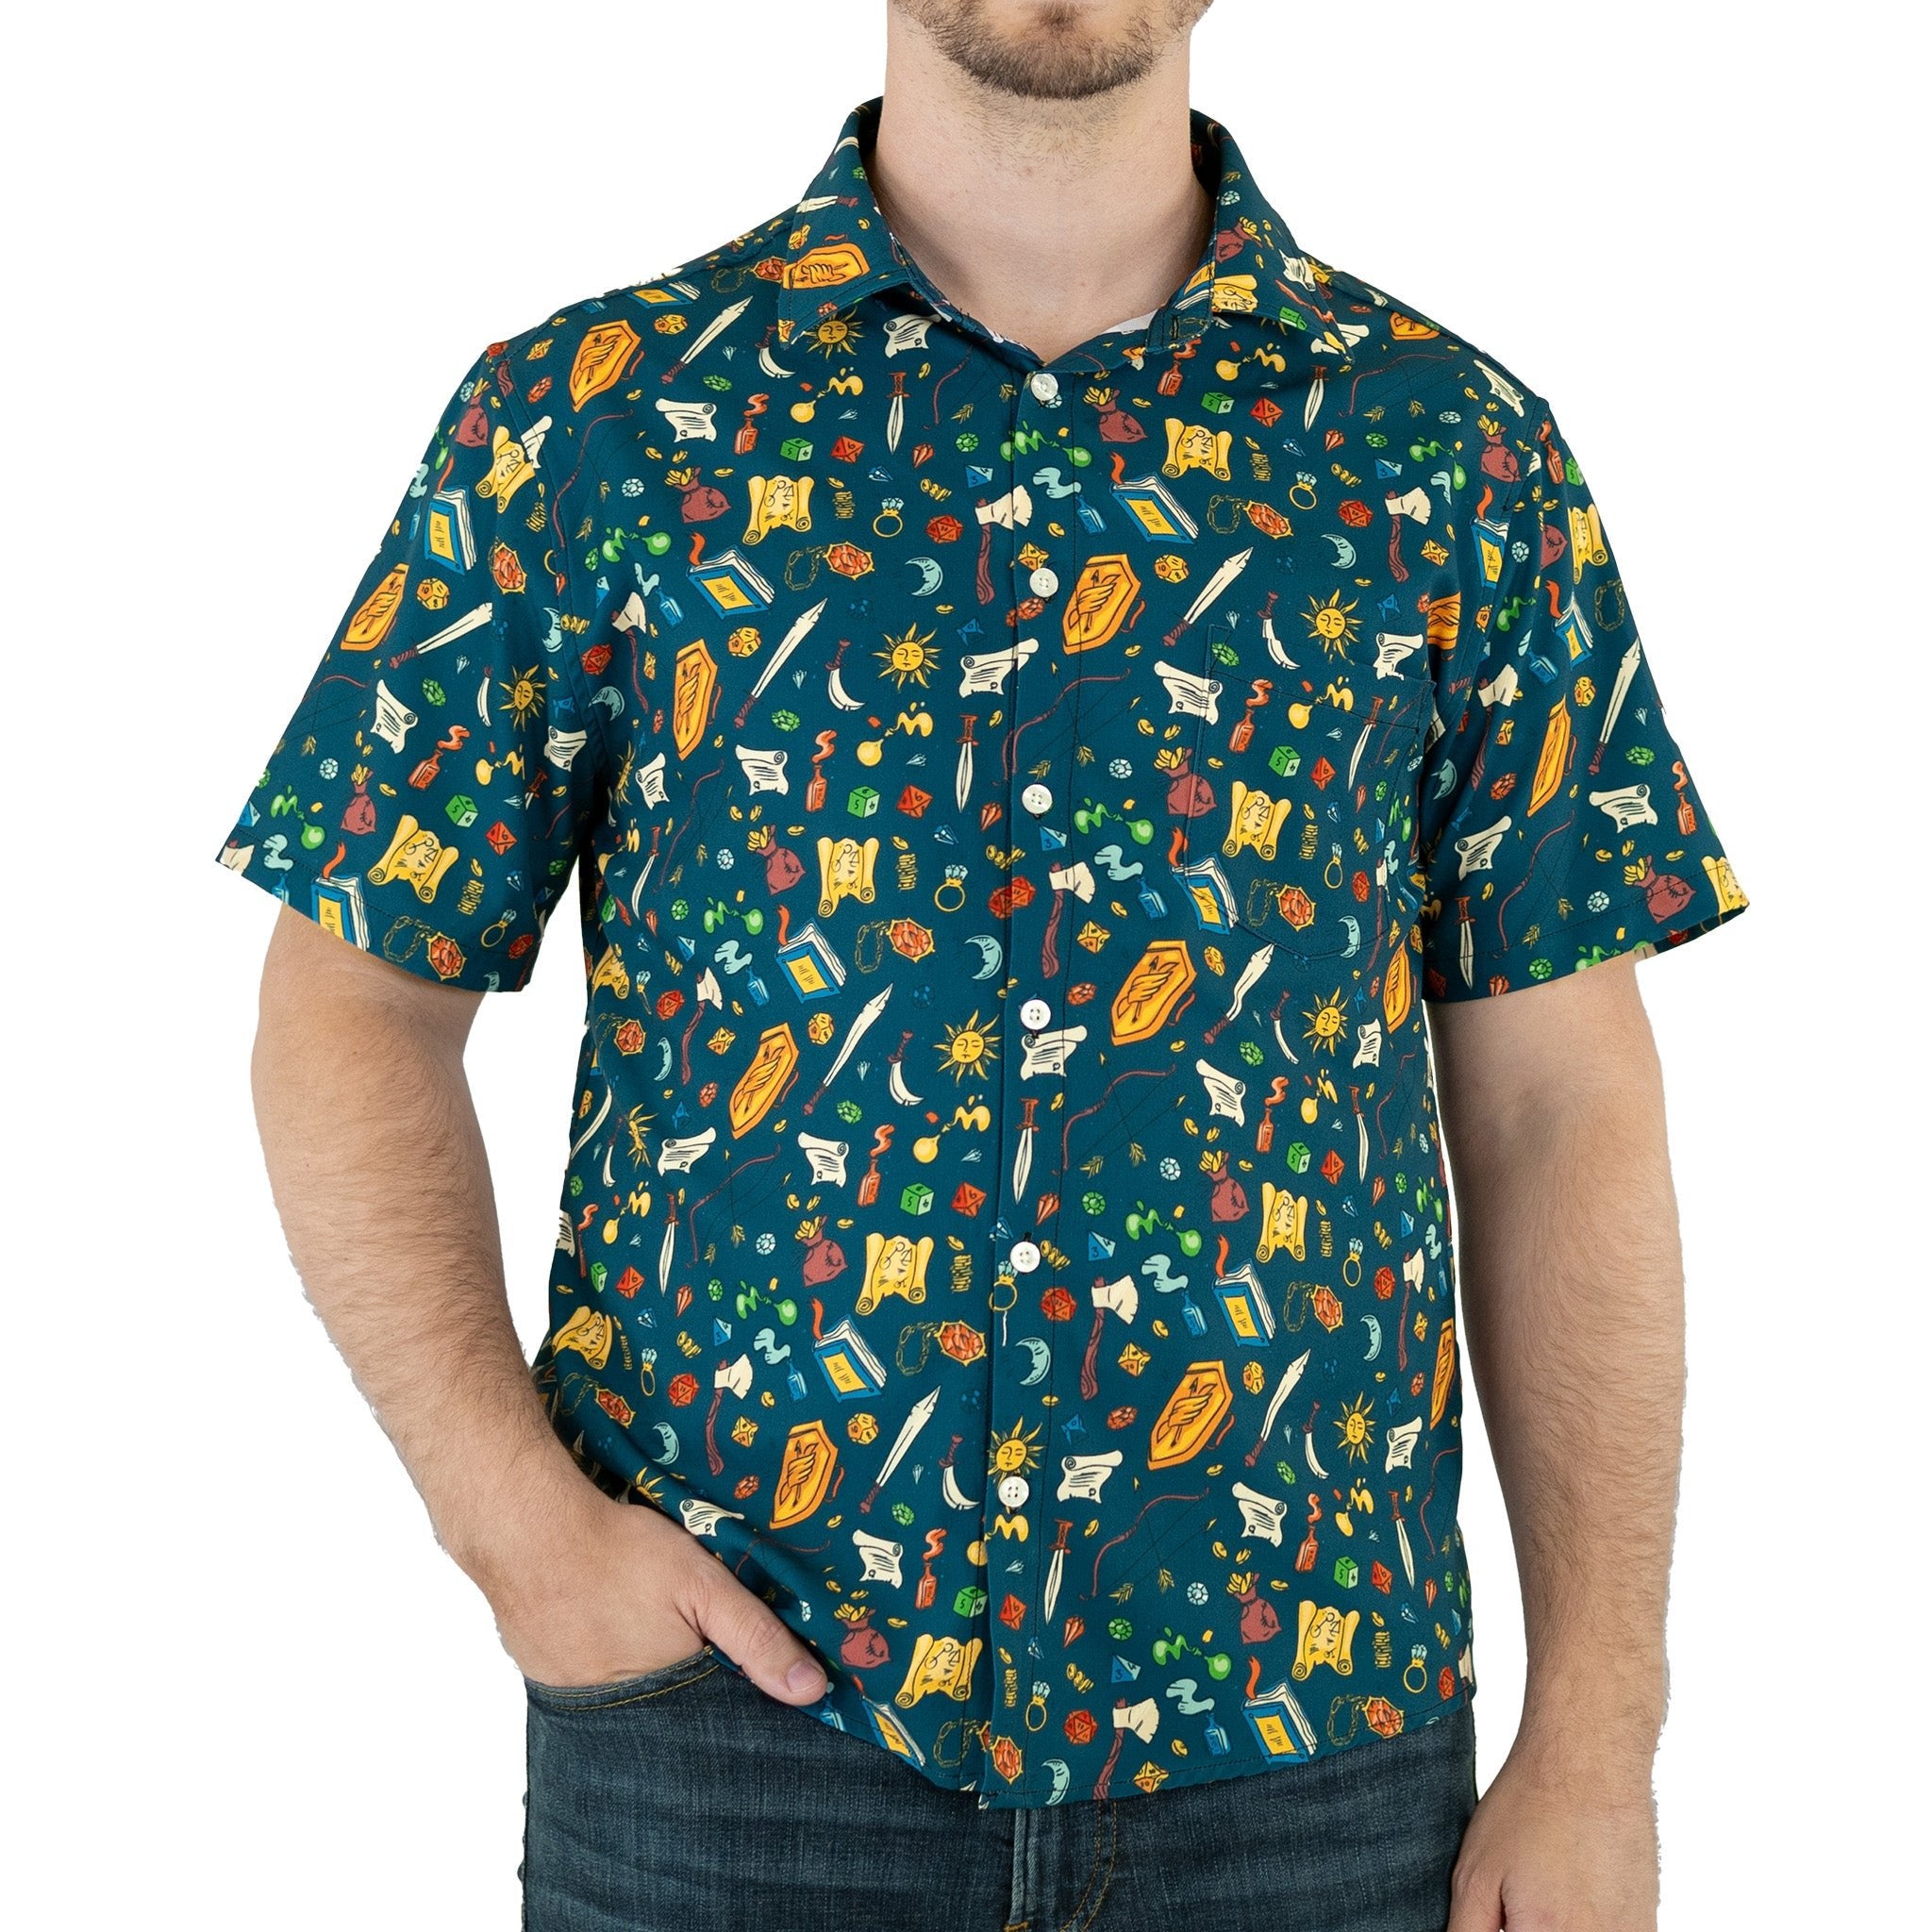 Ready-to-Ship Dnd Adventure Button Up Shirt - adult sizing - dnd & rpg print - ready-to-ship